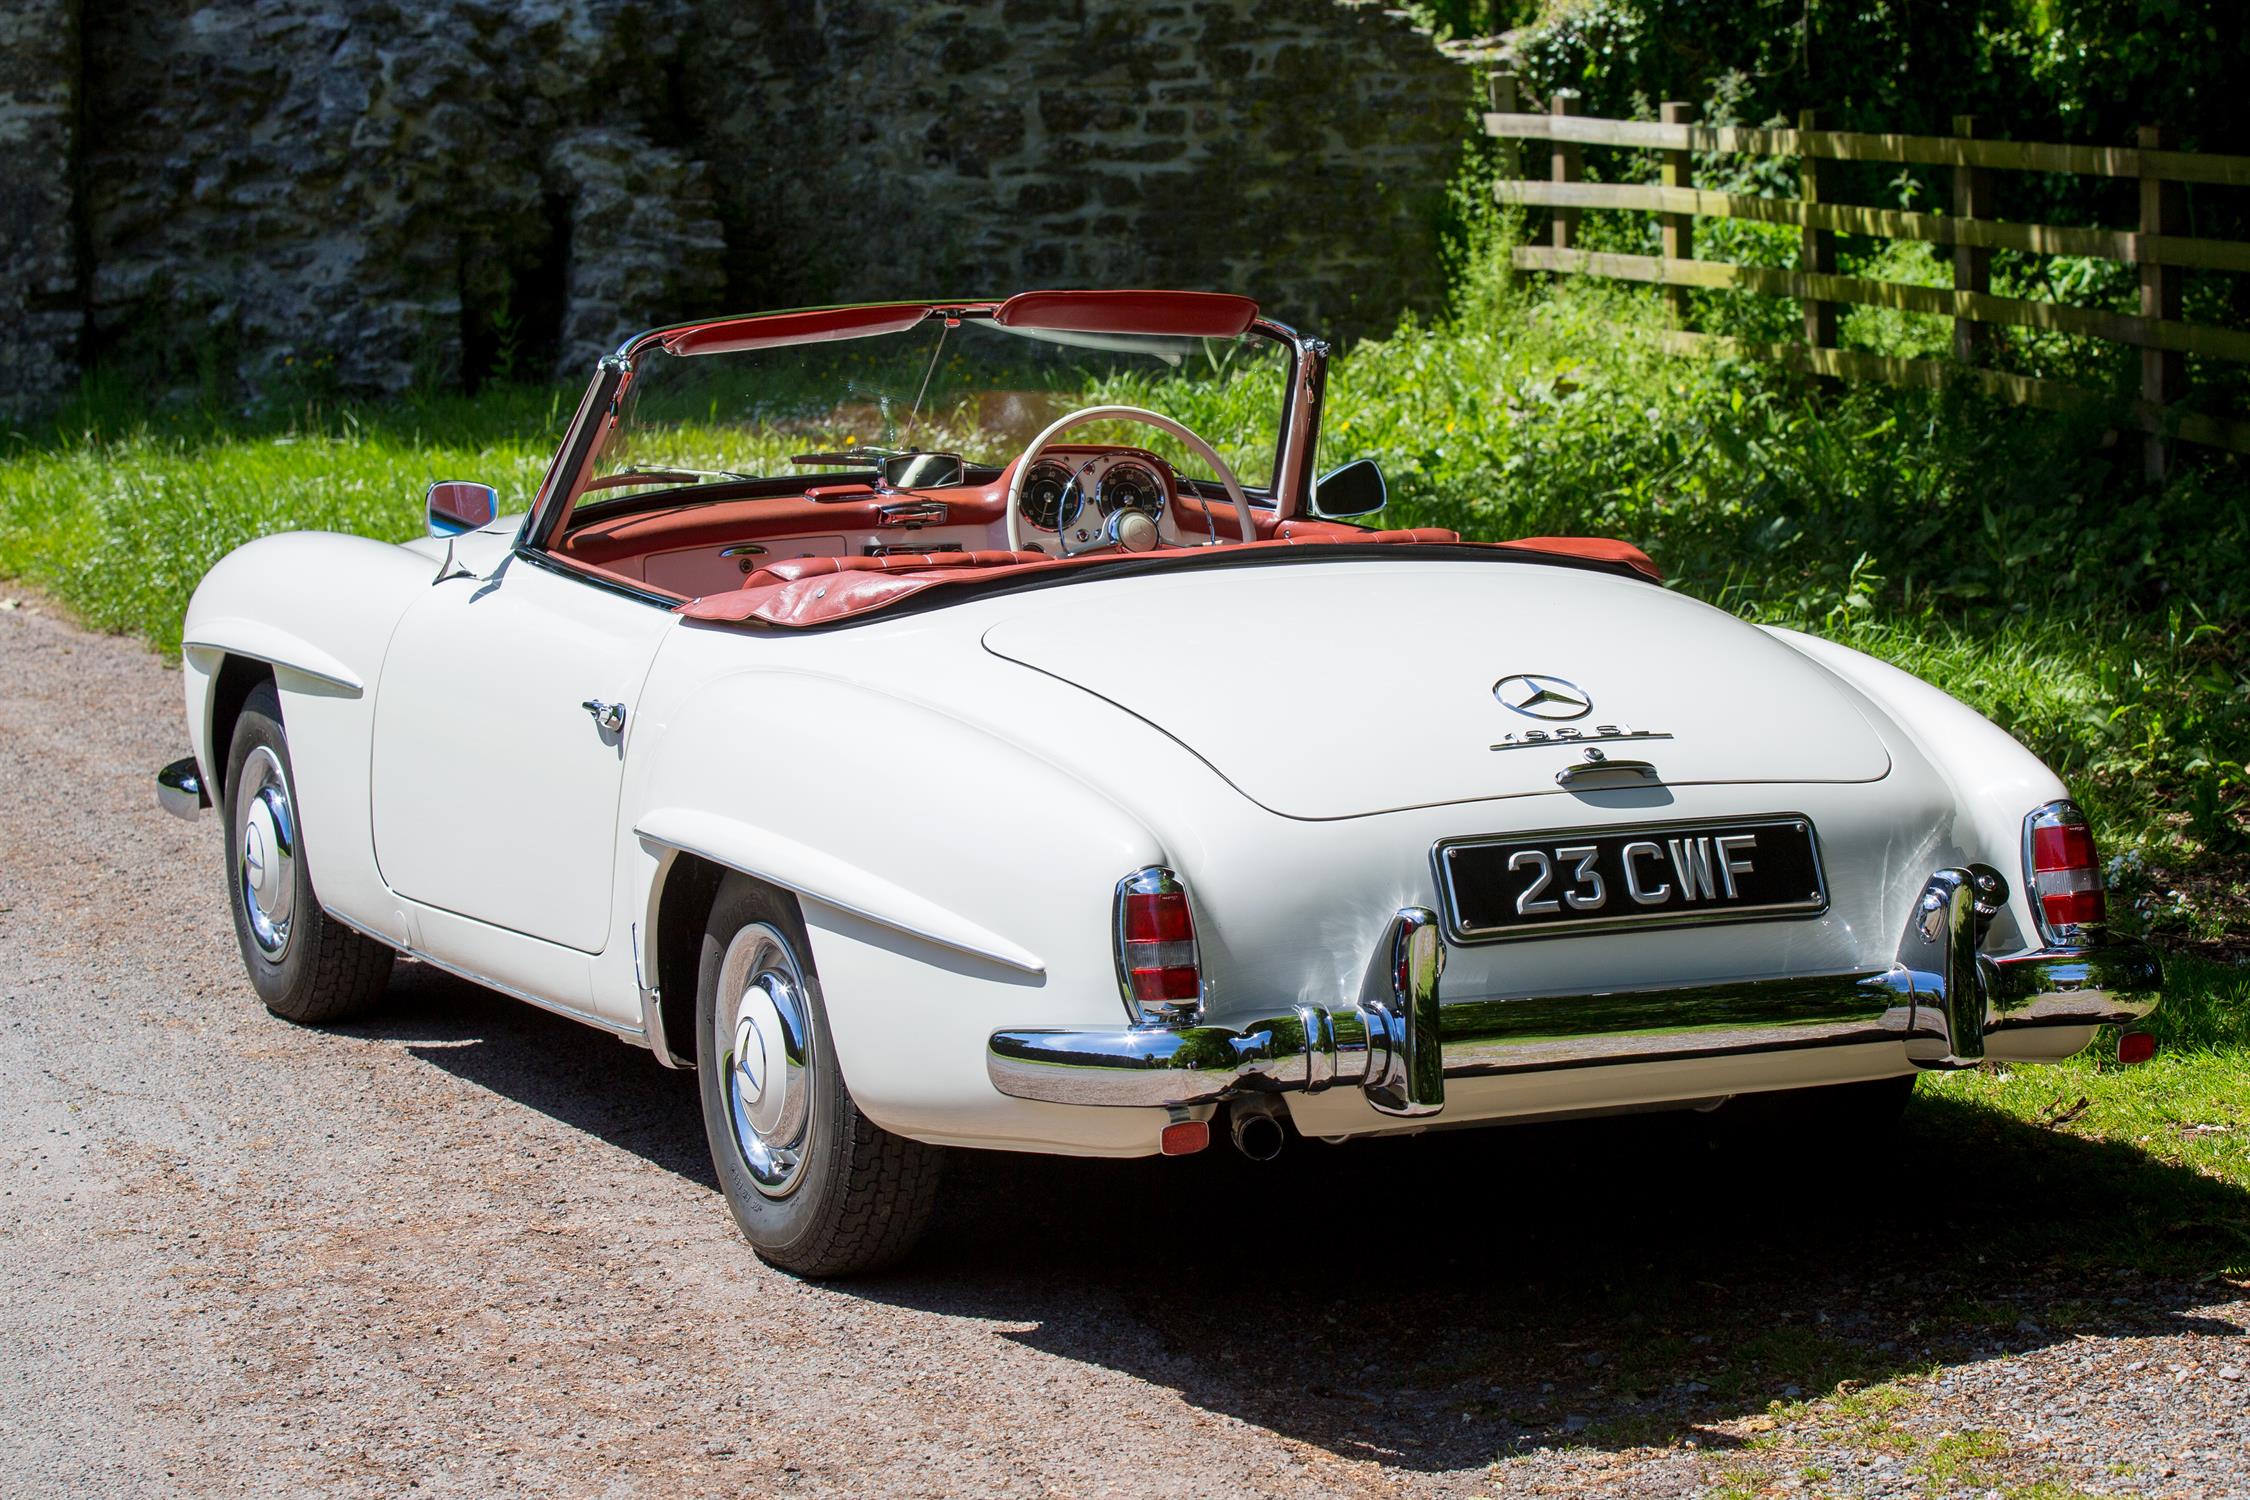 1962 Mercedes-Benz 190 SL with Hardtop - Right-Hand Drive - Image 4 of 19